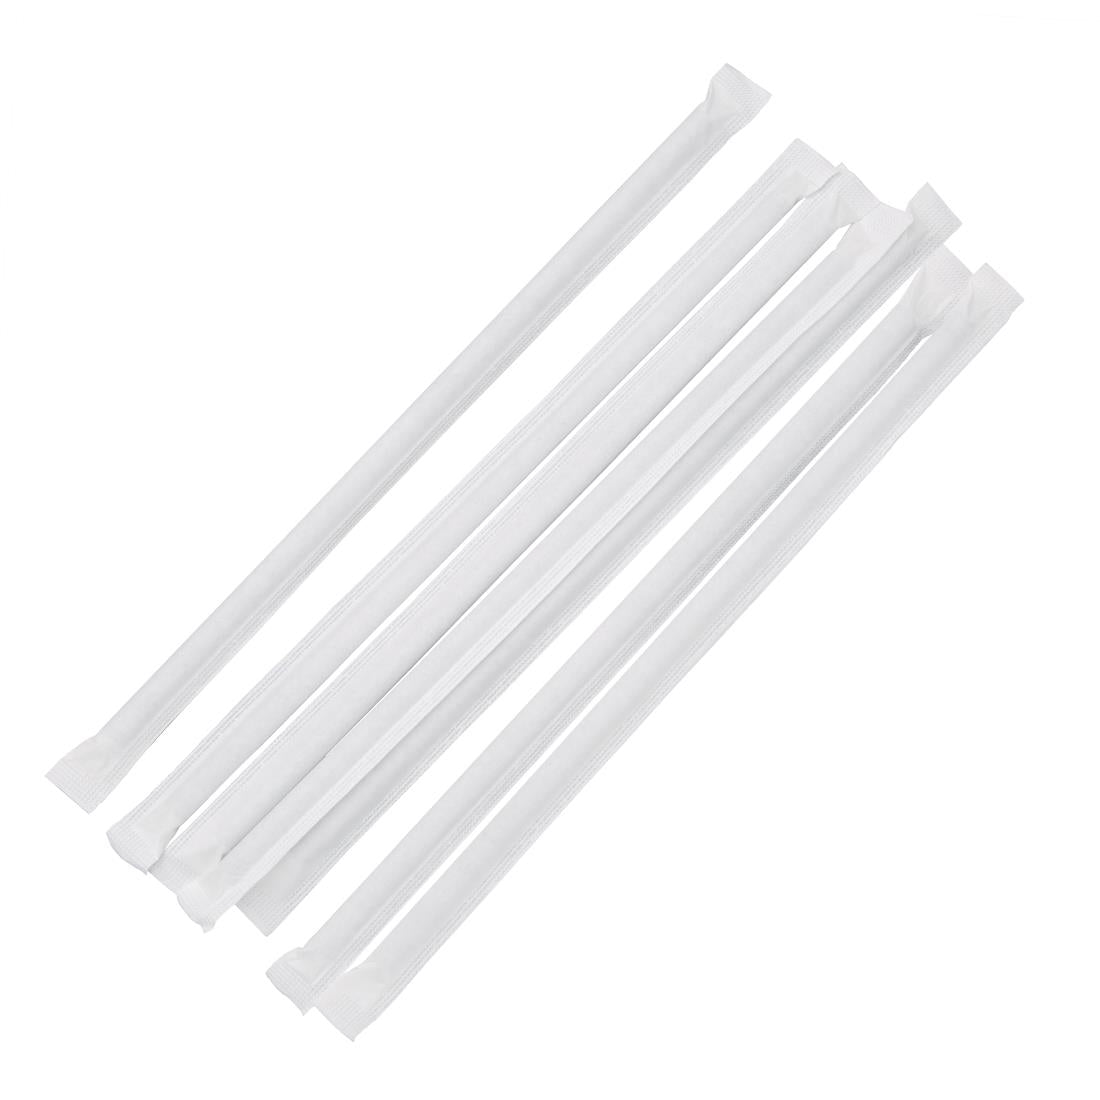 Fiesta Green Individually Wrapped Compostable Bendy Paper Straws Black (Pack of 250) JD Catering Equipment Solutions Ltd